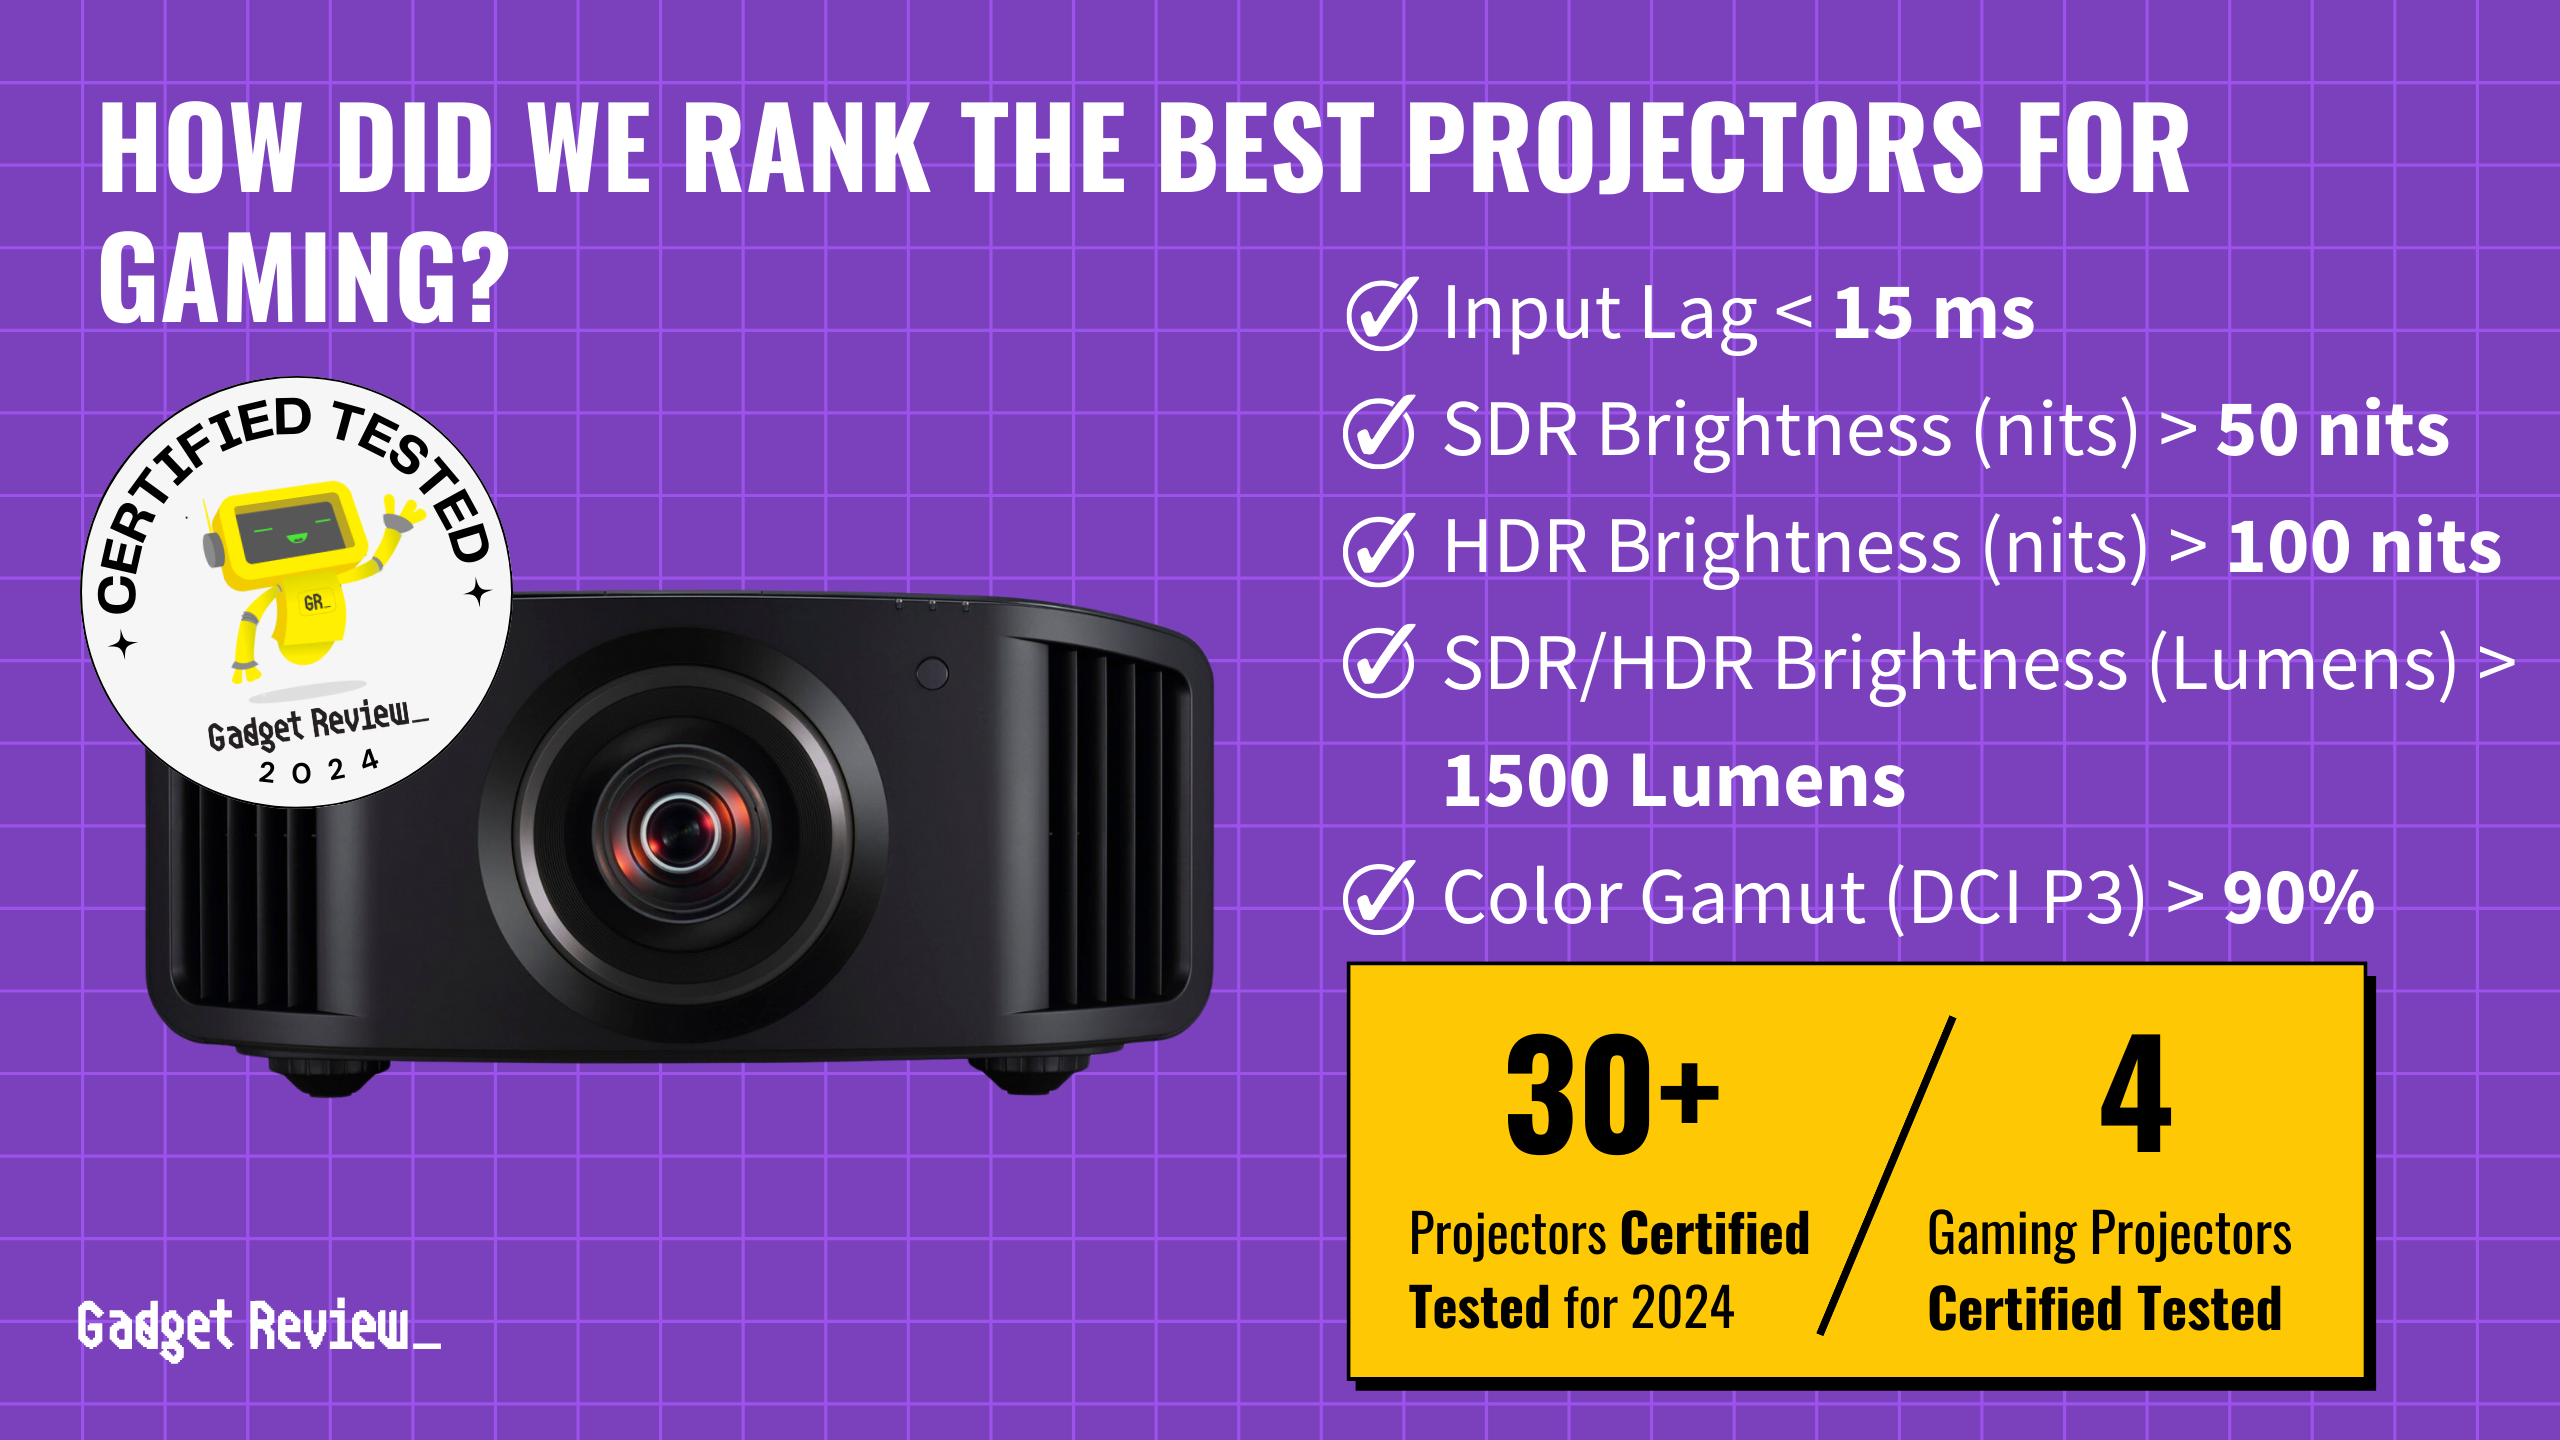 4 Top Projectors for Gaming of 2024 Ranked